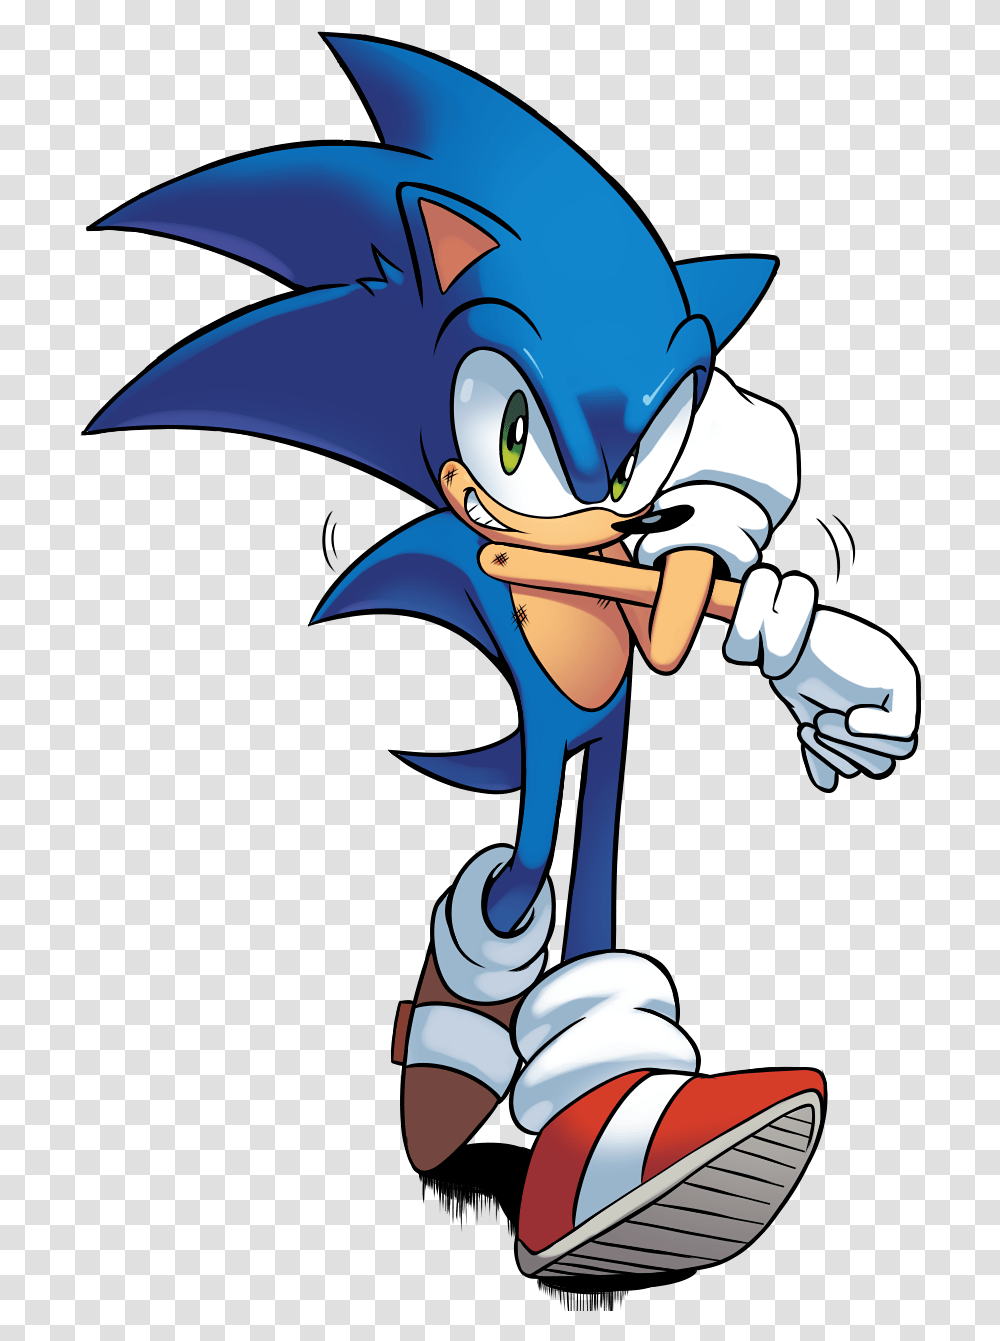 A Sonic From Archie Sonic Online Archie Sonic, Manga, Comics, Book, Hand Transparent Png